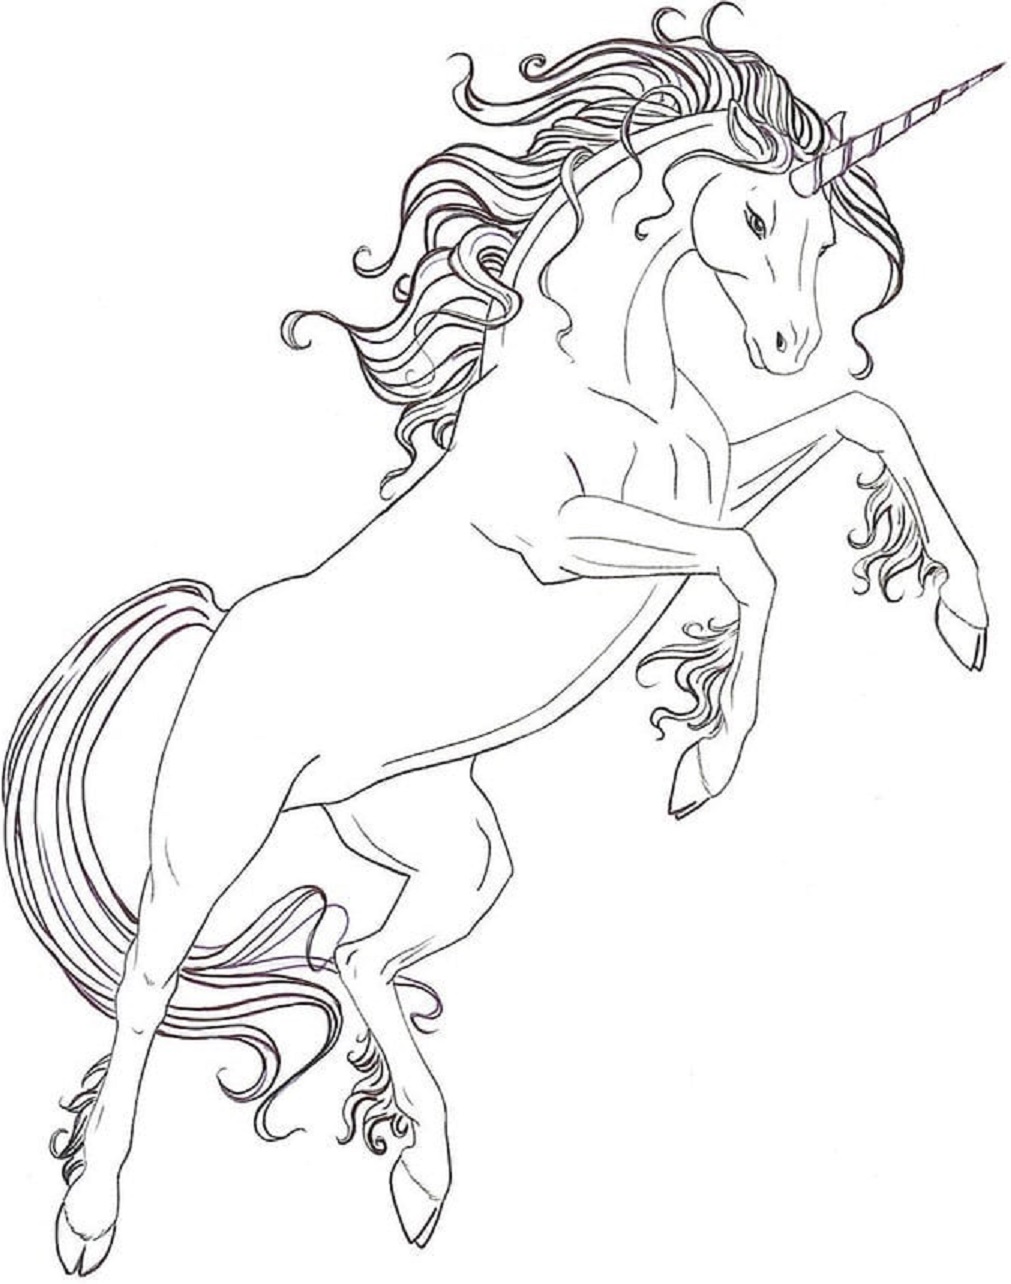 Unicorn Jumping Coloring Page   Free Printable Coloring Pages for Kids